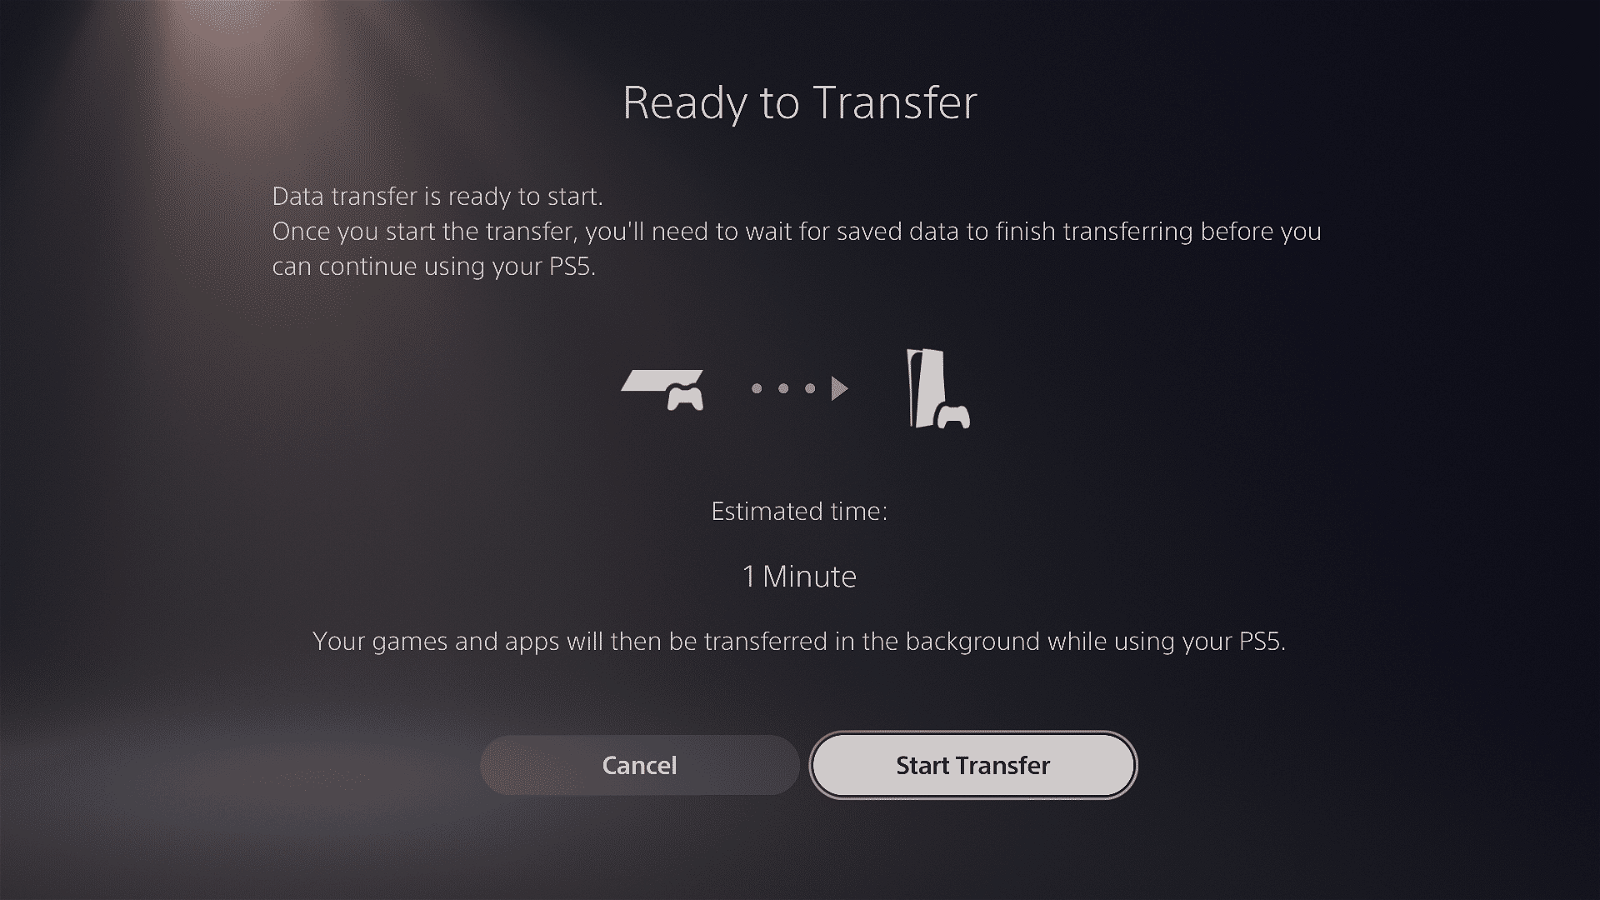 How to transfer your PS4 games to the PS5 over A Network